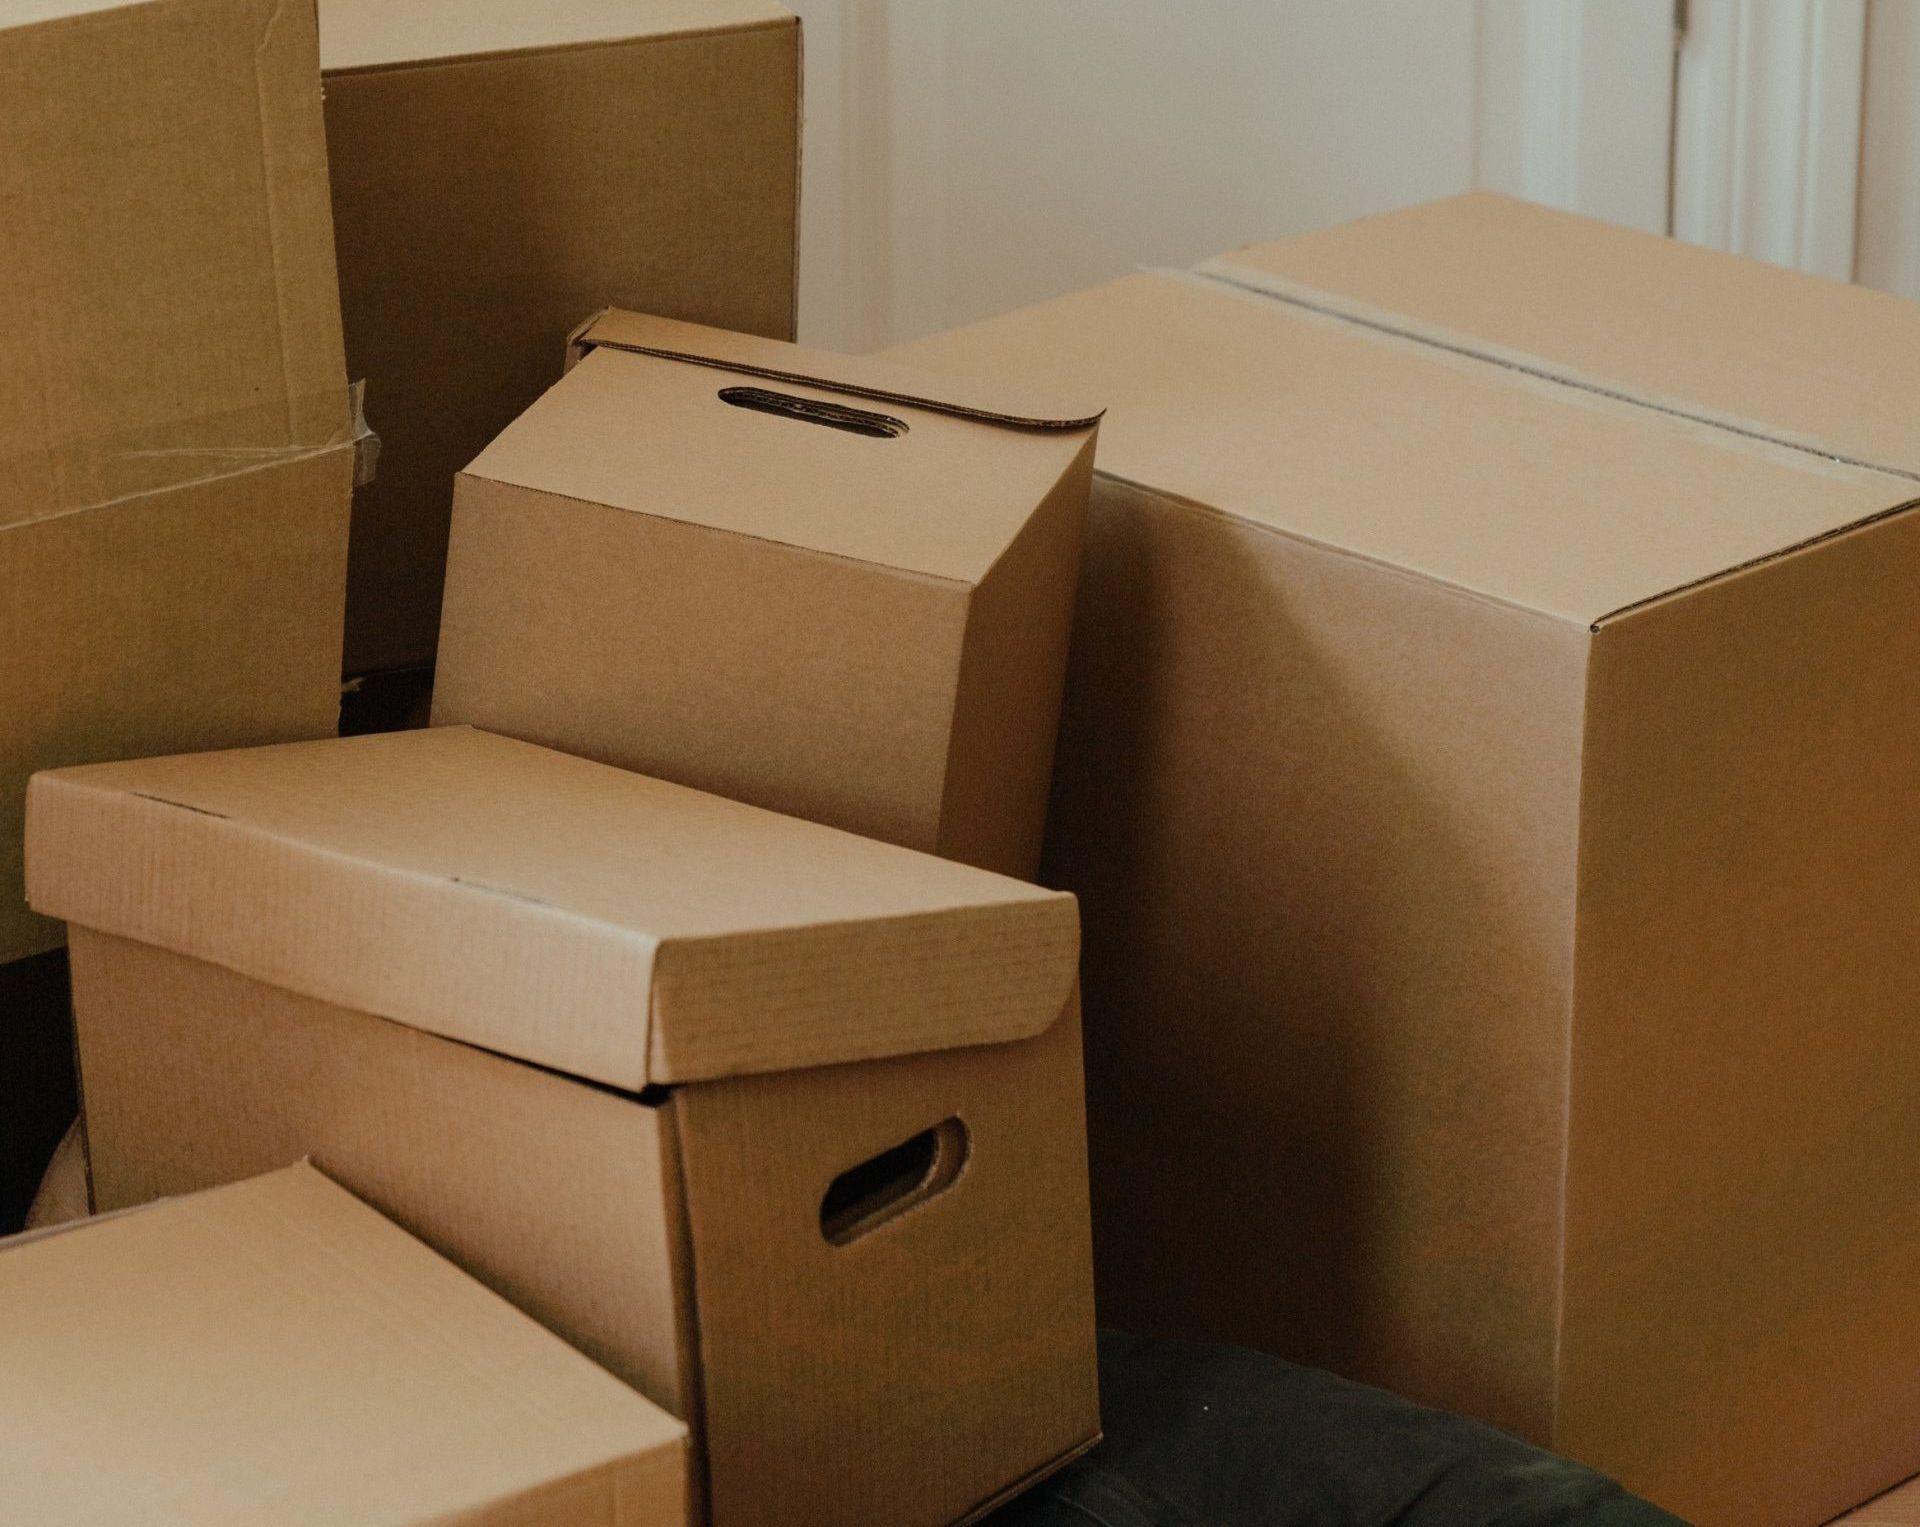 Boxes Used By A Professional Moving Company in Arizona